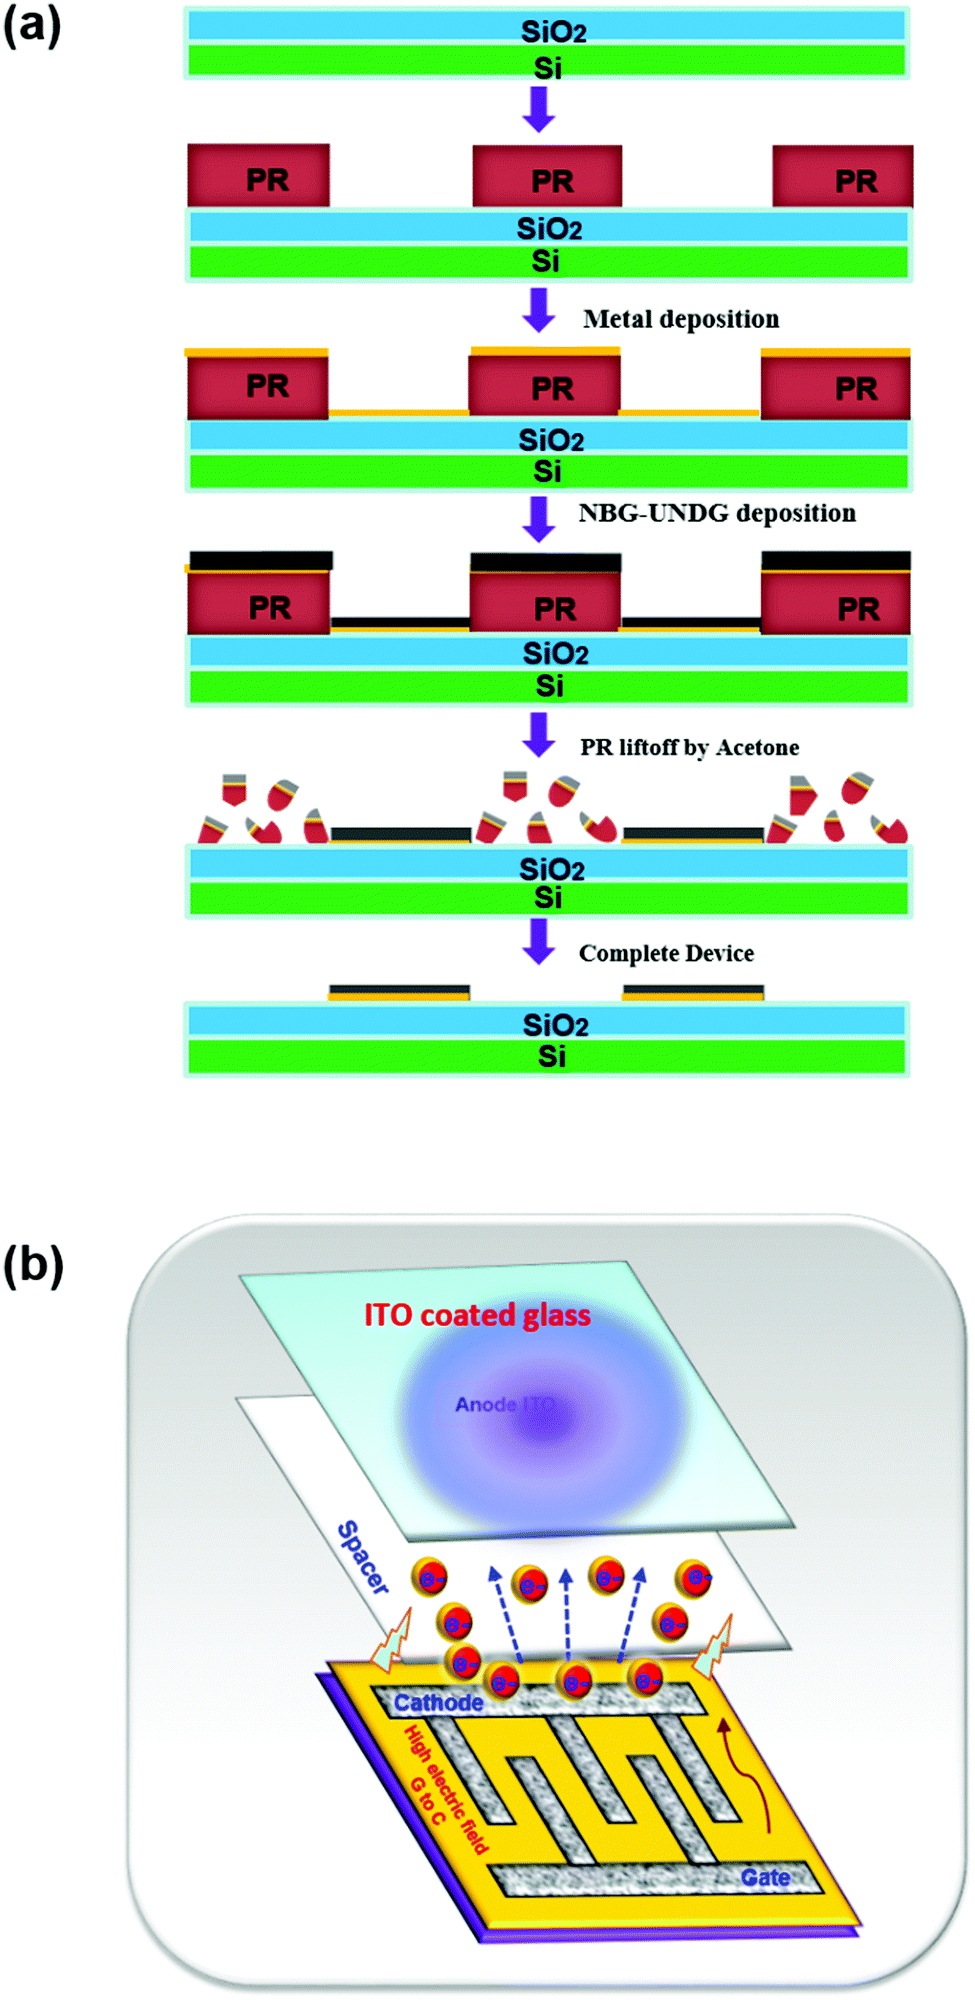 Engineered design and fabrication of long lifetime multifunctional devices  based on electrically conductive diamond ultrananowire multifinger integrat   - Journal of Materials Chemistry C (RSC Publishing)  DOI:10.1039/C6TC03340G